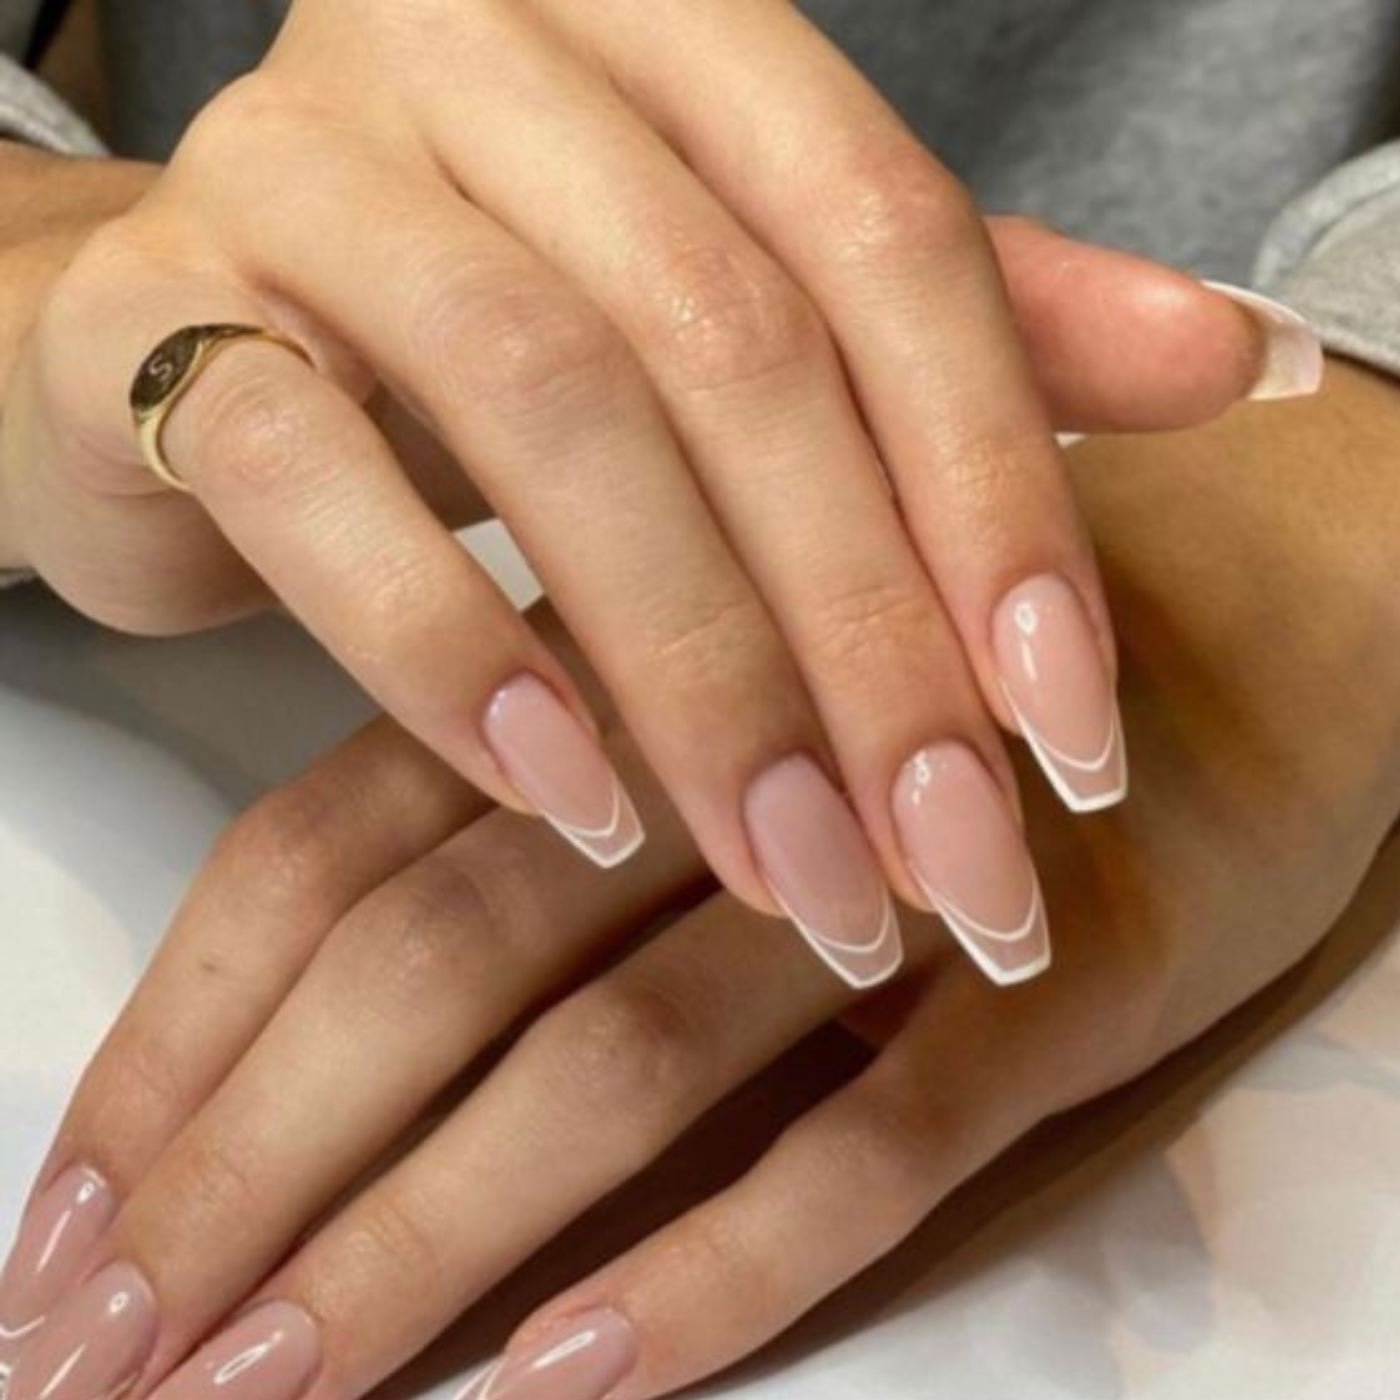 14 Chic Ways to Wear French Tip Nails this Season